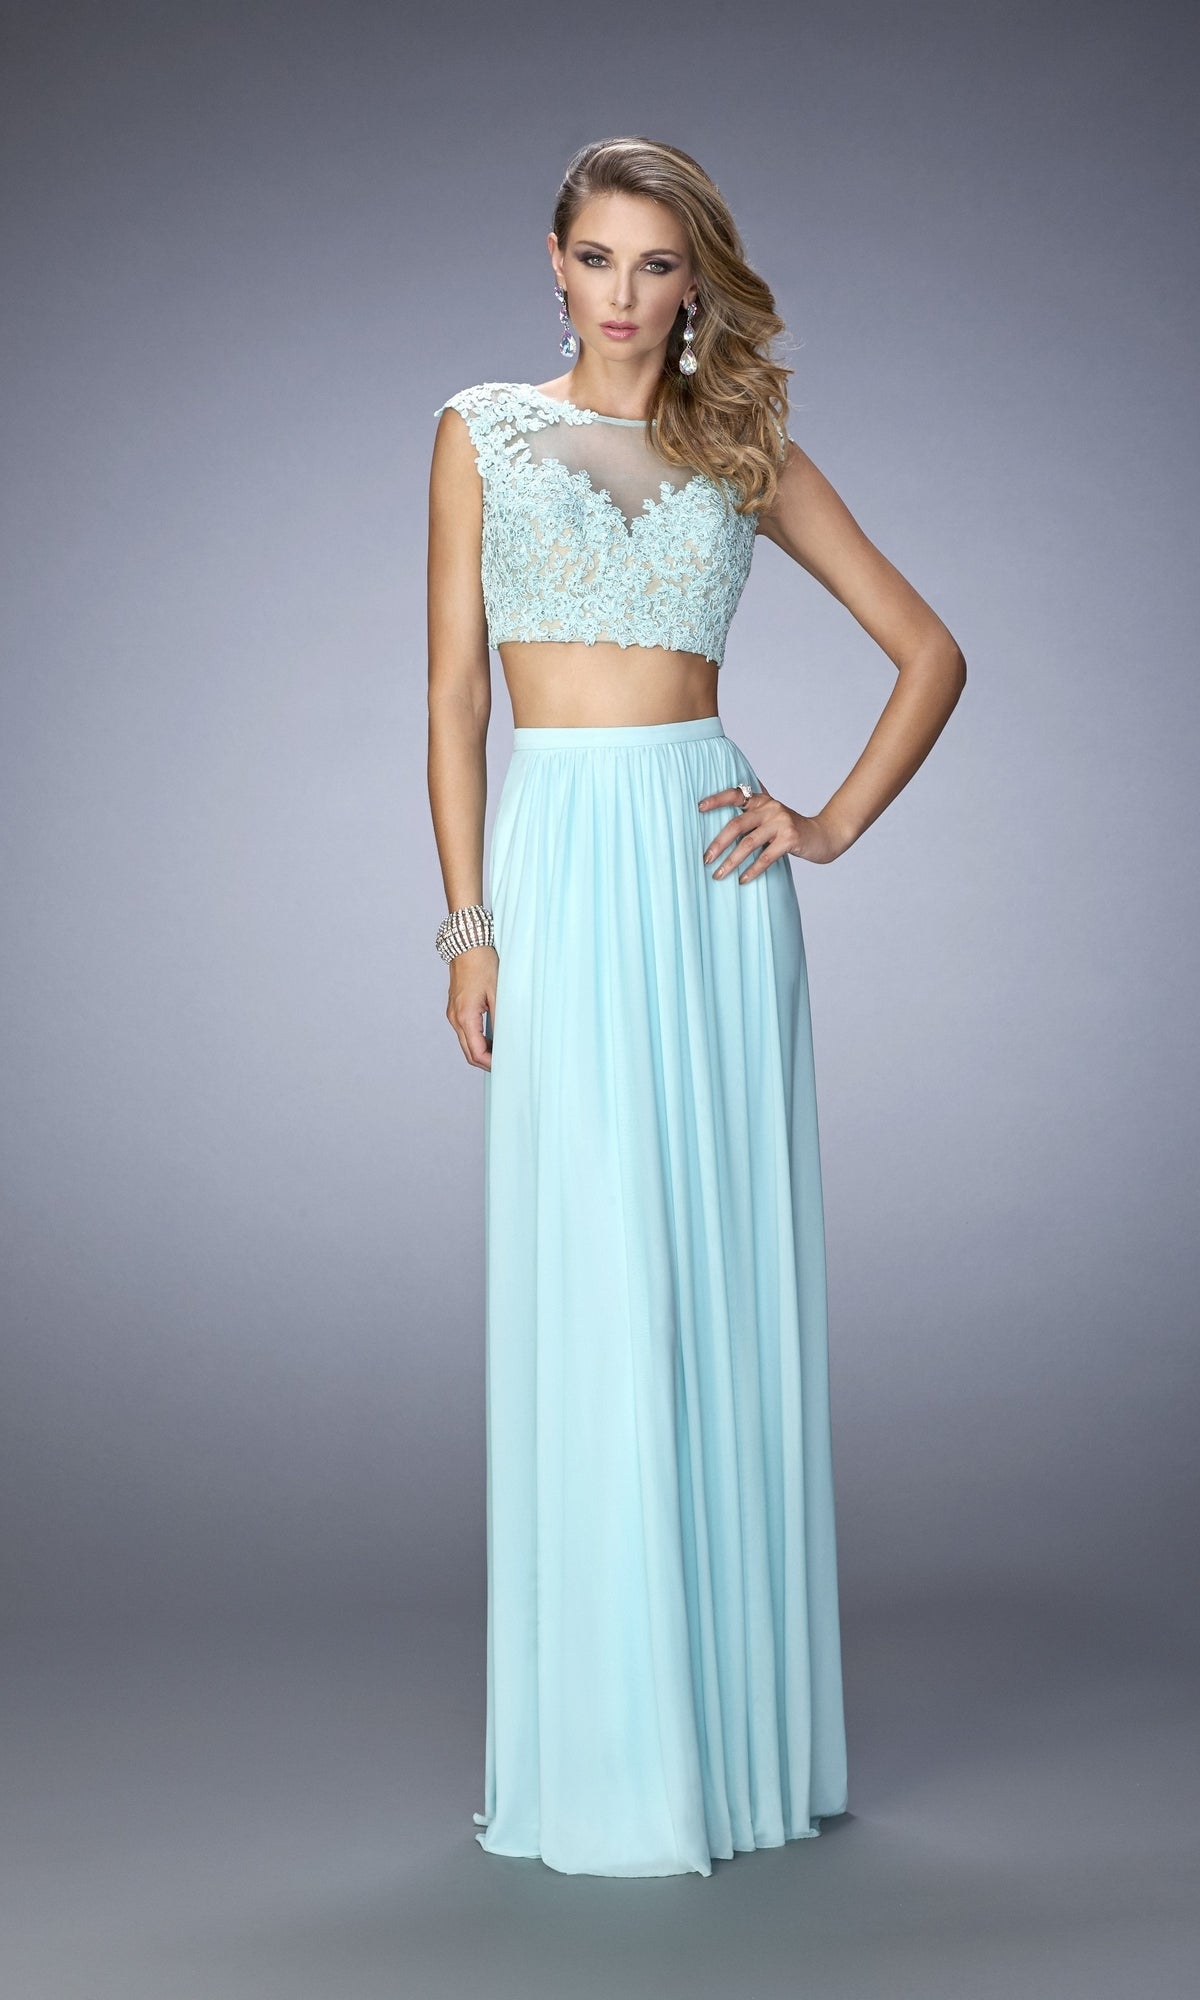 Two-Piece Prom Dress with Sheer Back - PromGirl